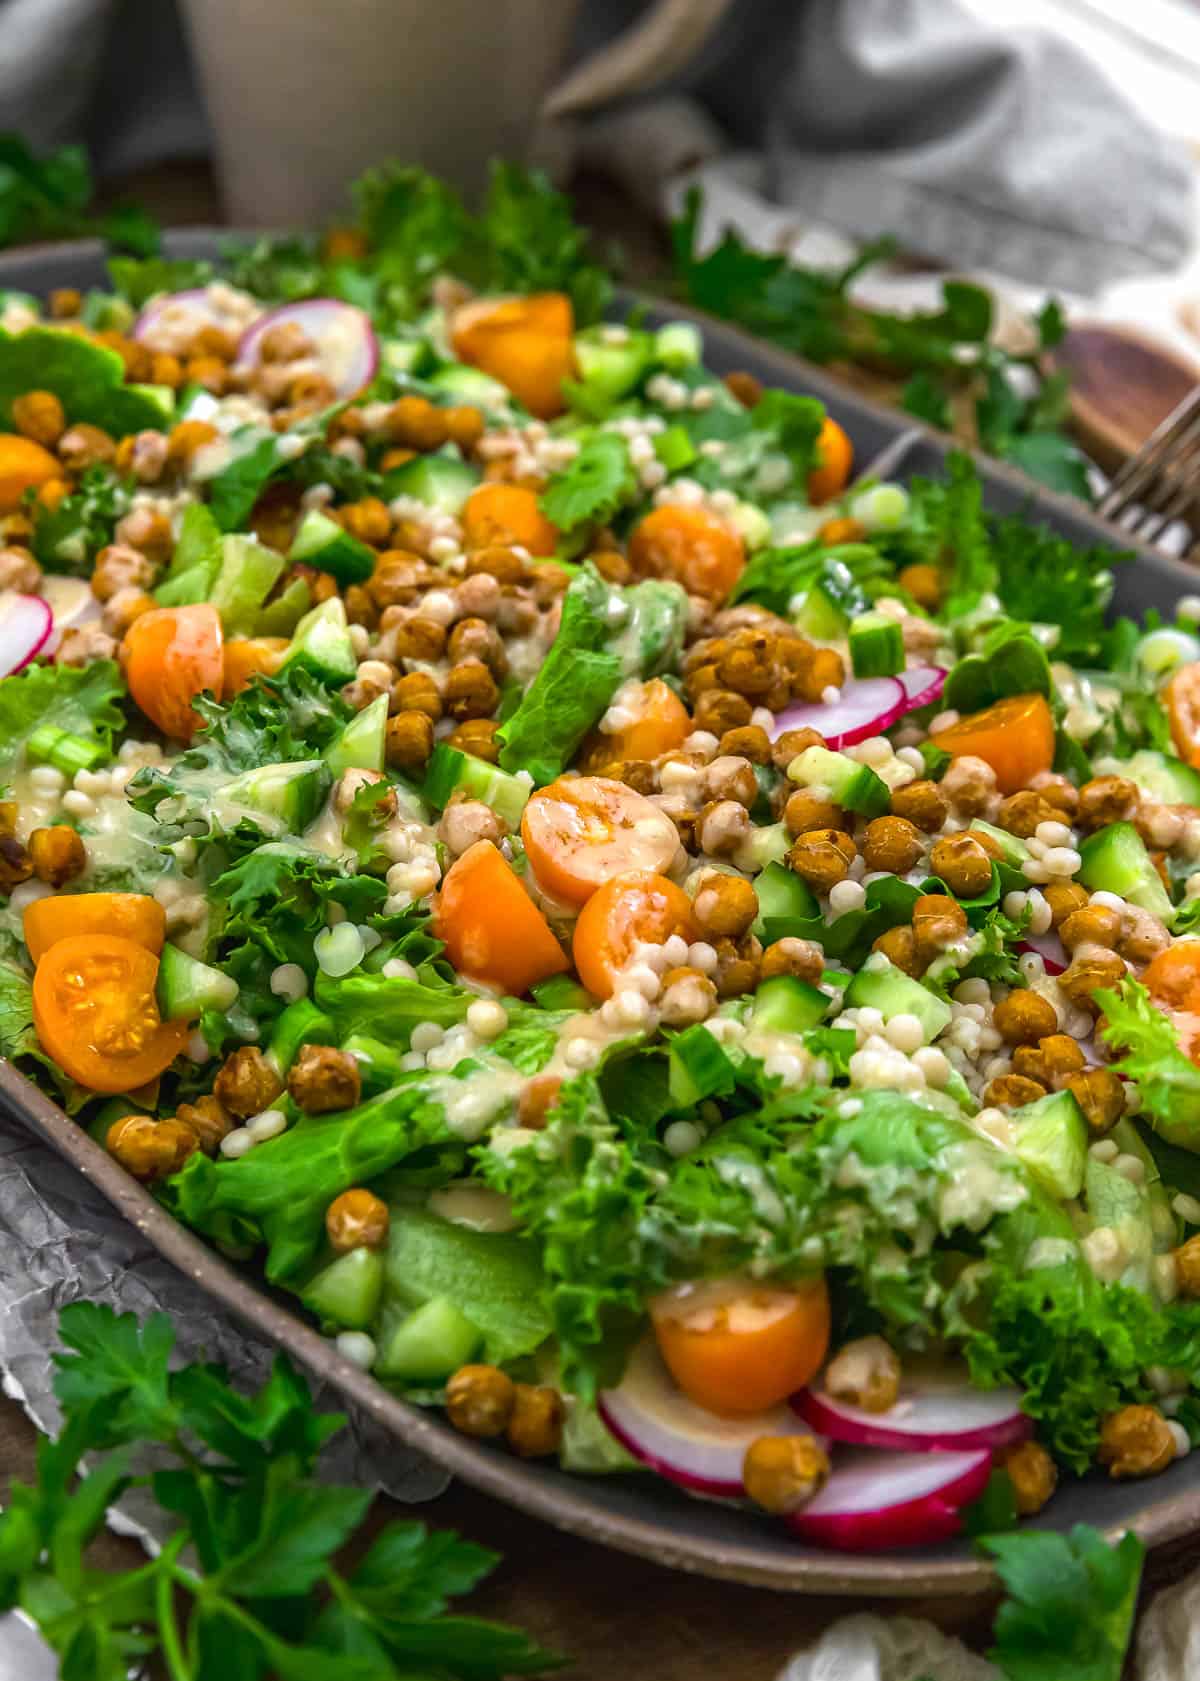 Platter of Middle Eastern Spicy Roasted Chickpea Salad